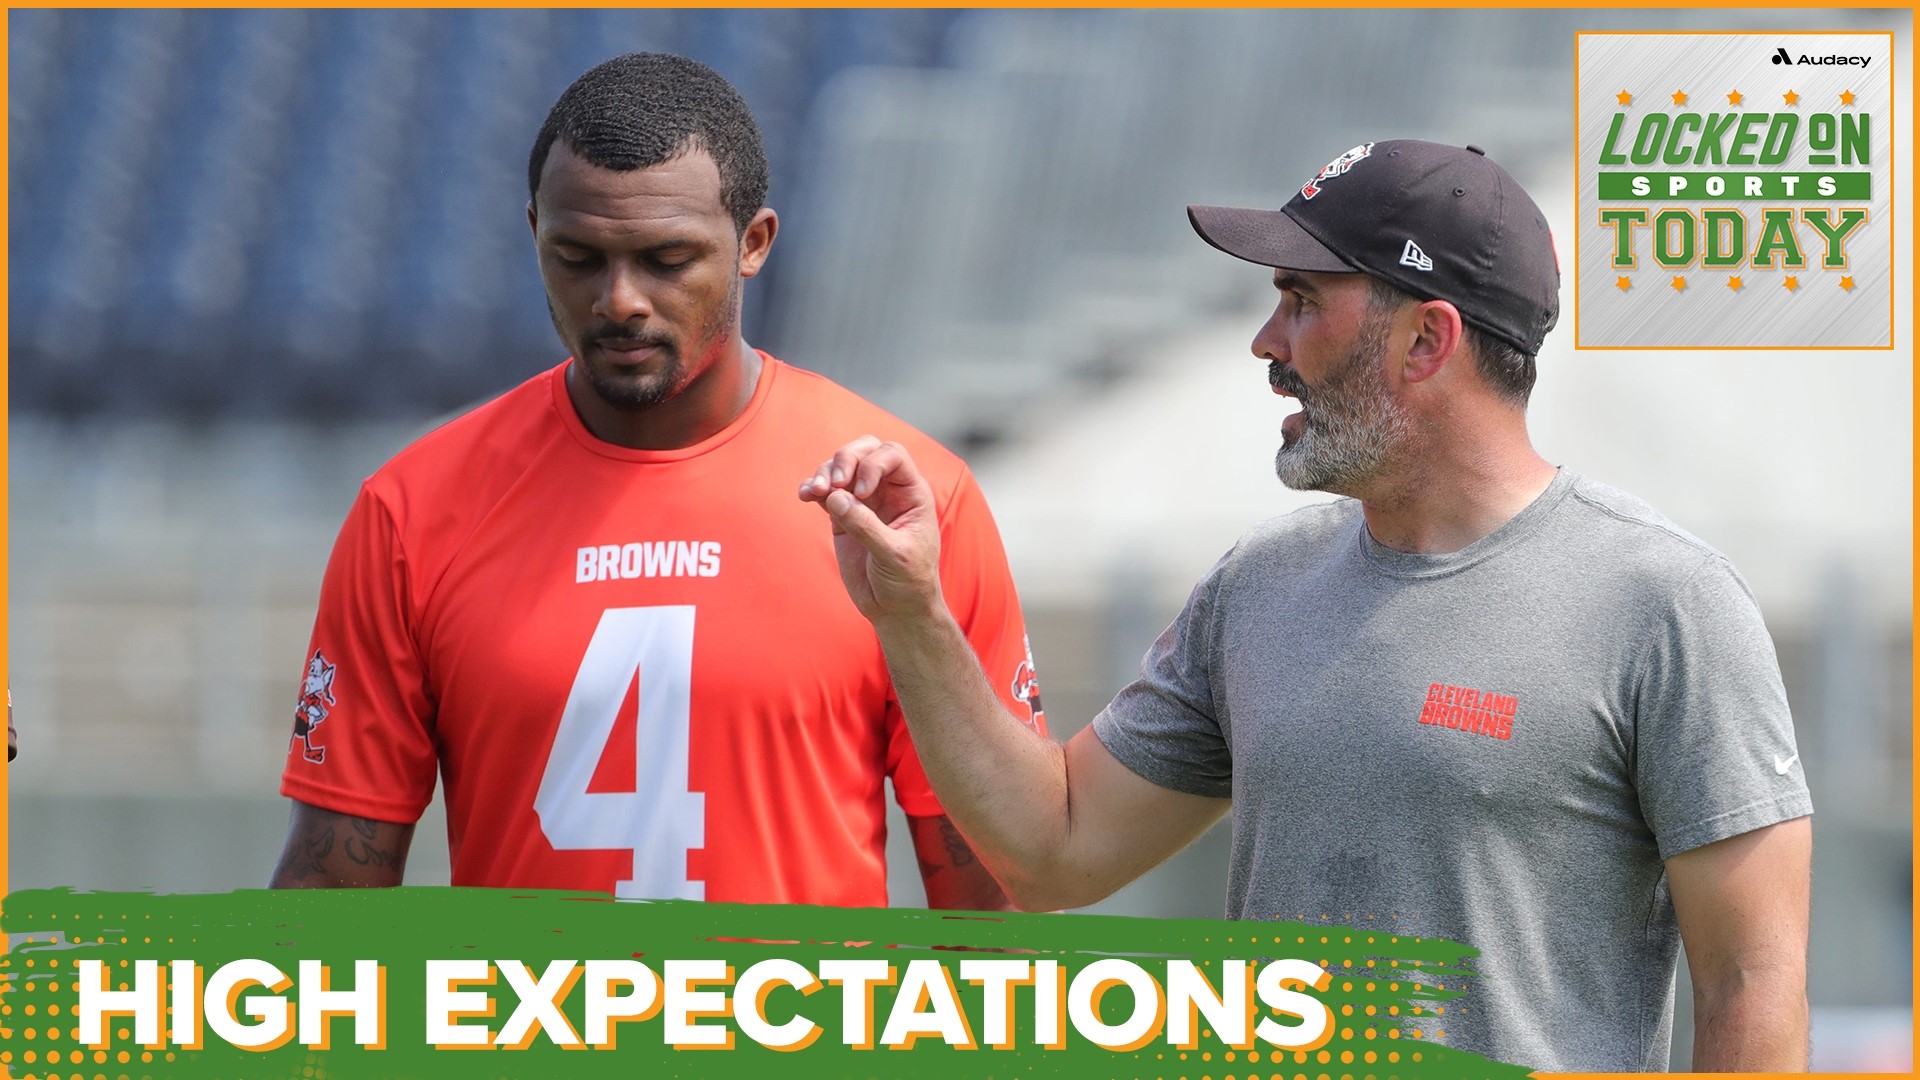 Discussing the day's top sports stories from Deshaun Watson preparing to play Sunday for the Browns to a look at the best wide receivers in the NFL.